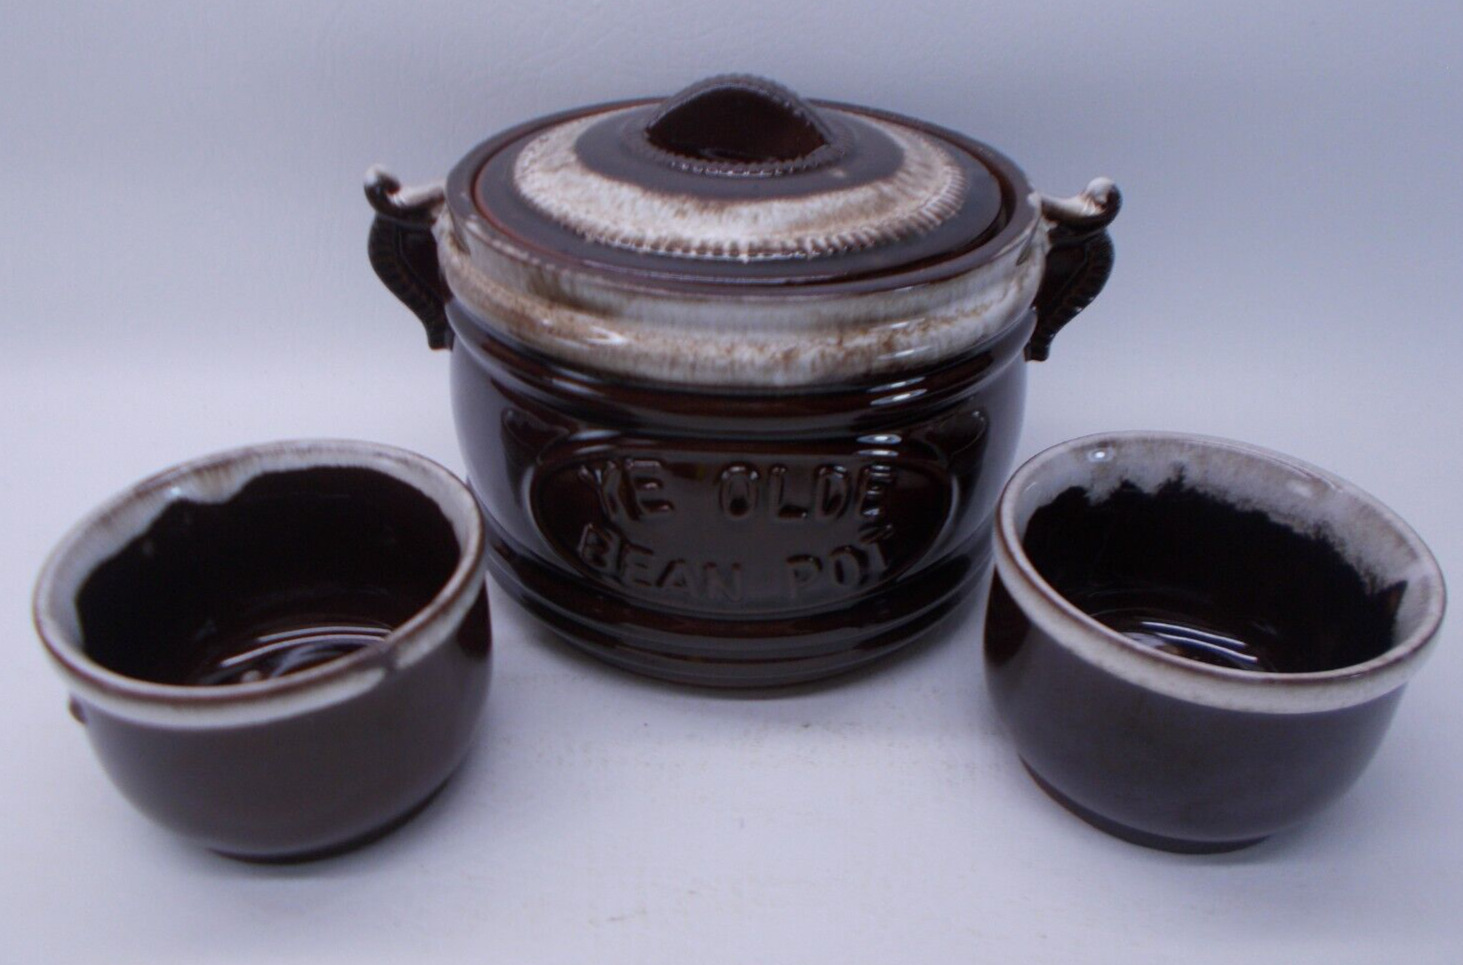 Vintage Ye Olde Bean Pot With 2 Cups Small Bowls Made in Japan